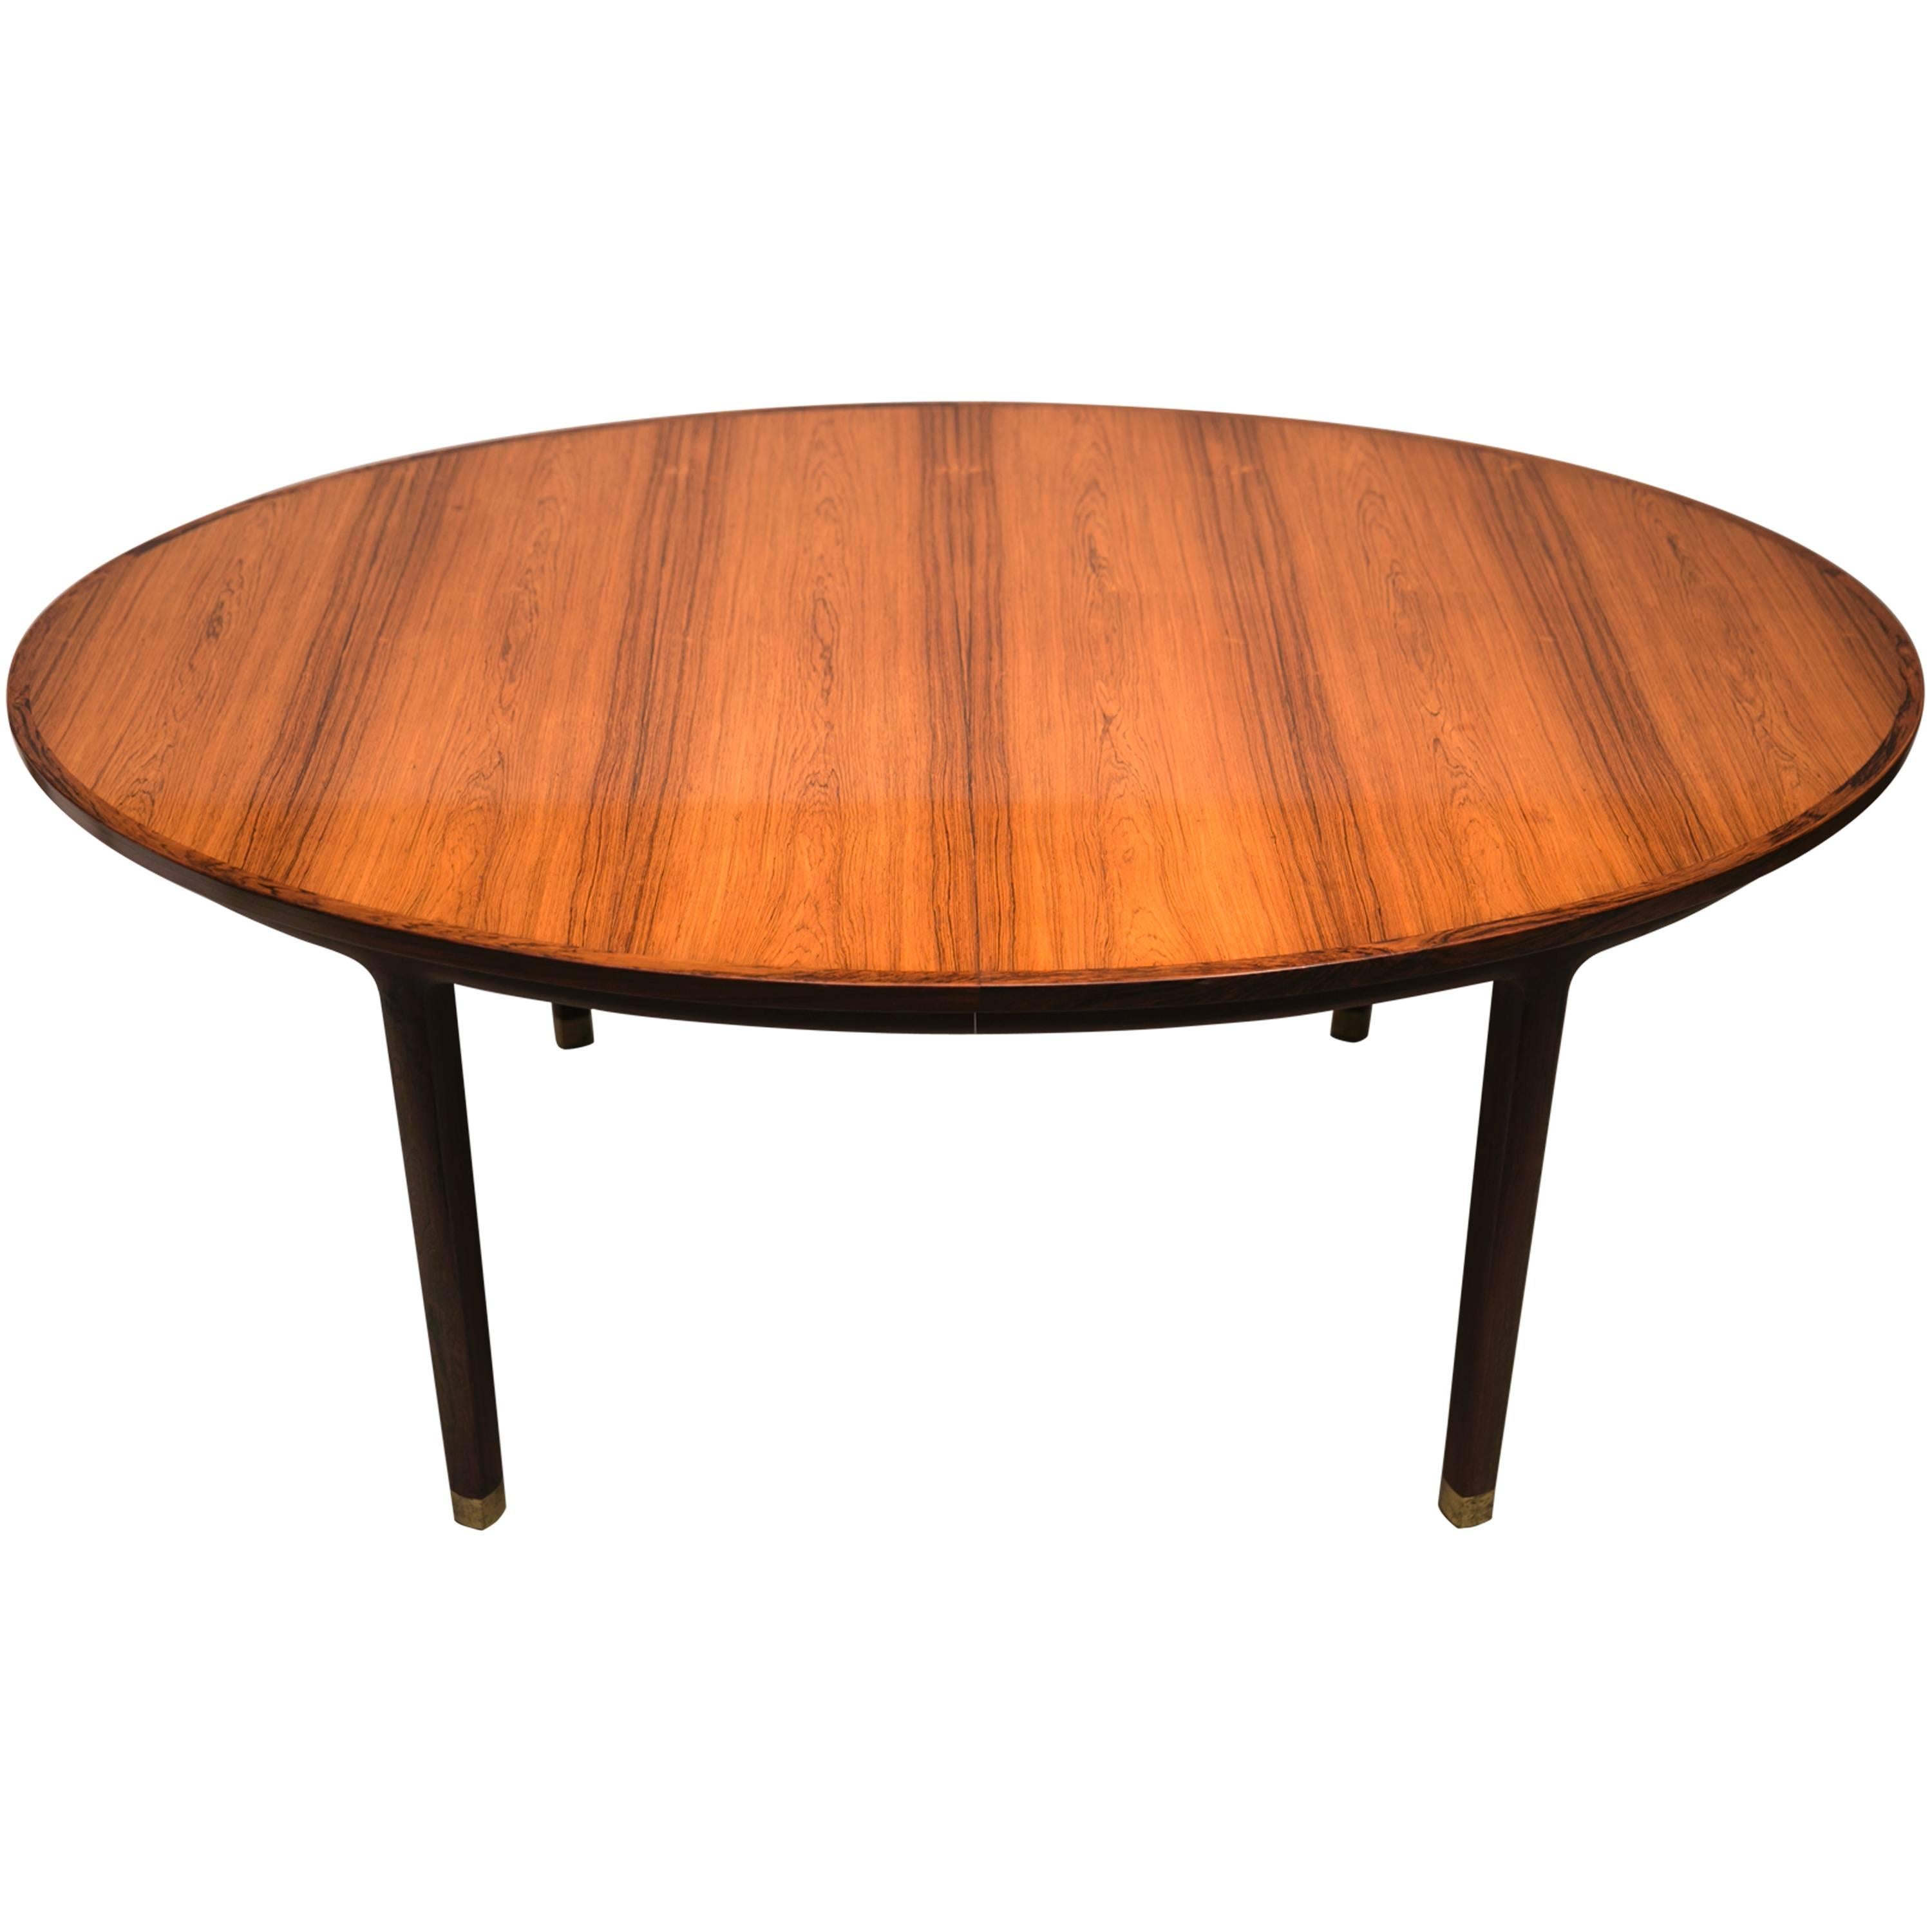 Well Proportioned Brazilian Rosewood Oval Dining Table by Ole Wanscher